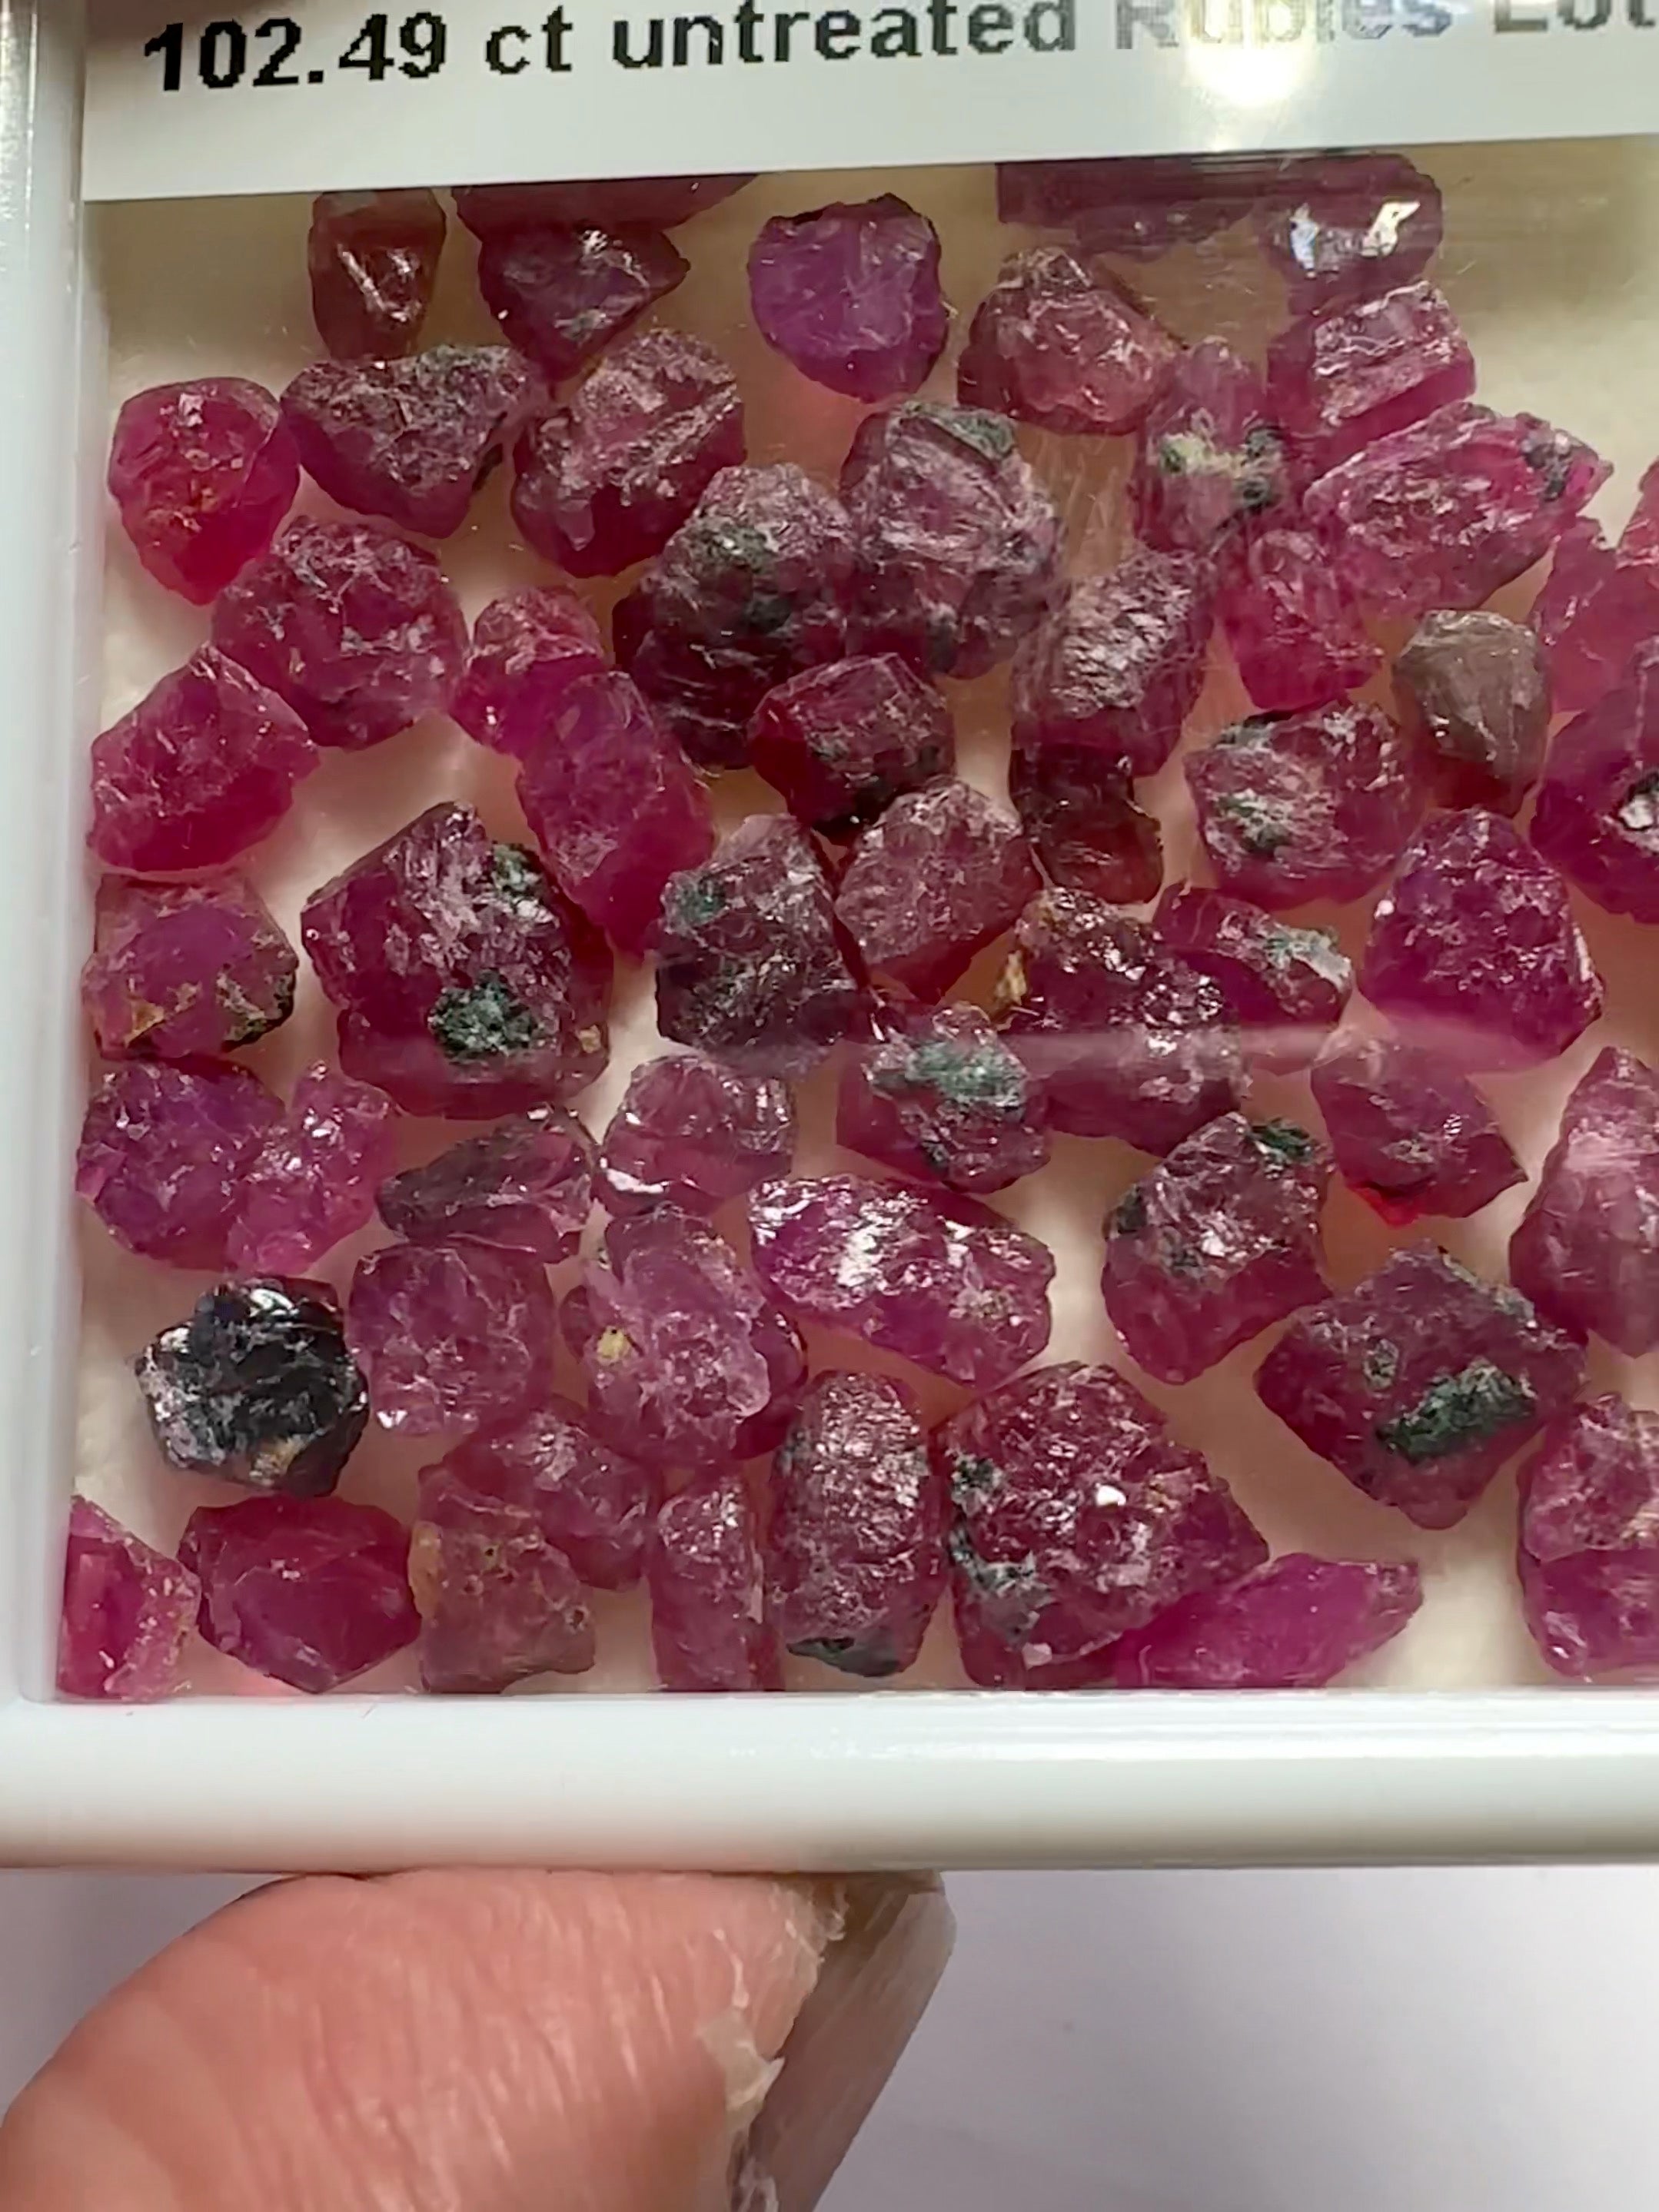 102.49ct Ruby Lot, Winza, Tanzania, Untreated Unheated, good for setting as is